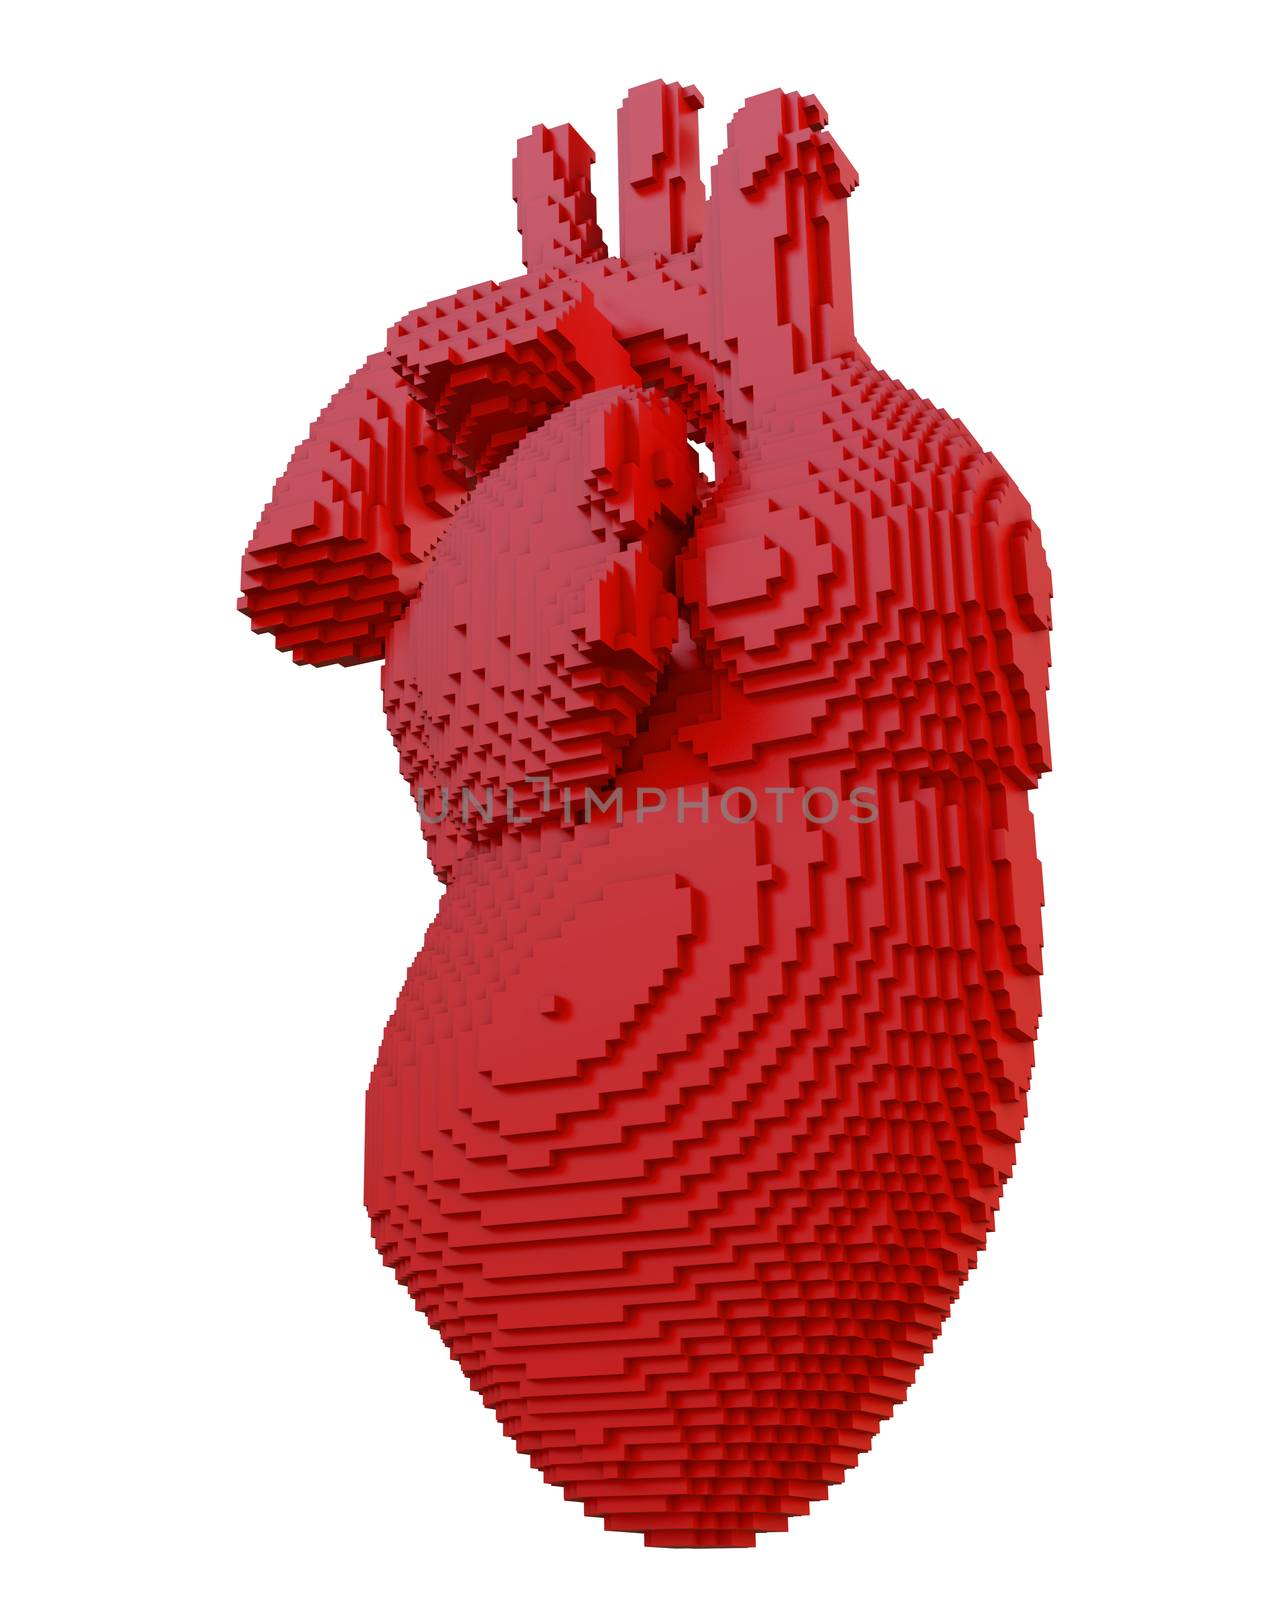 3d printed heart isolated on white background. Concept 3d printing of internal organs. 3D illsutration